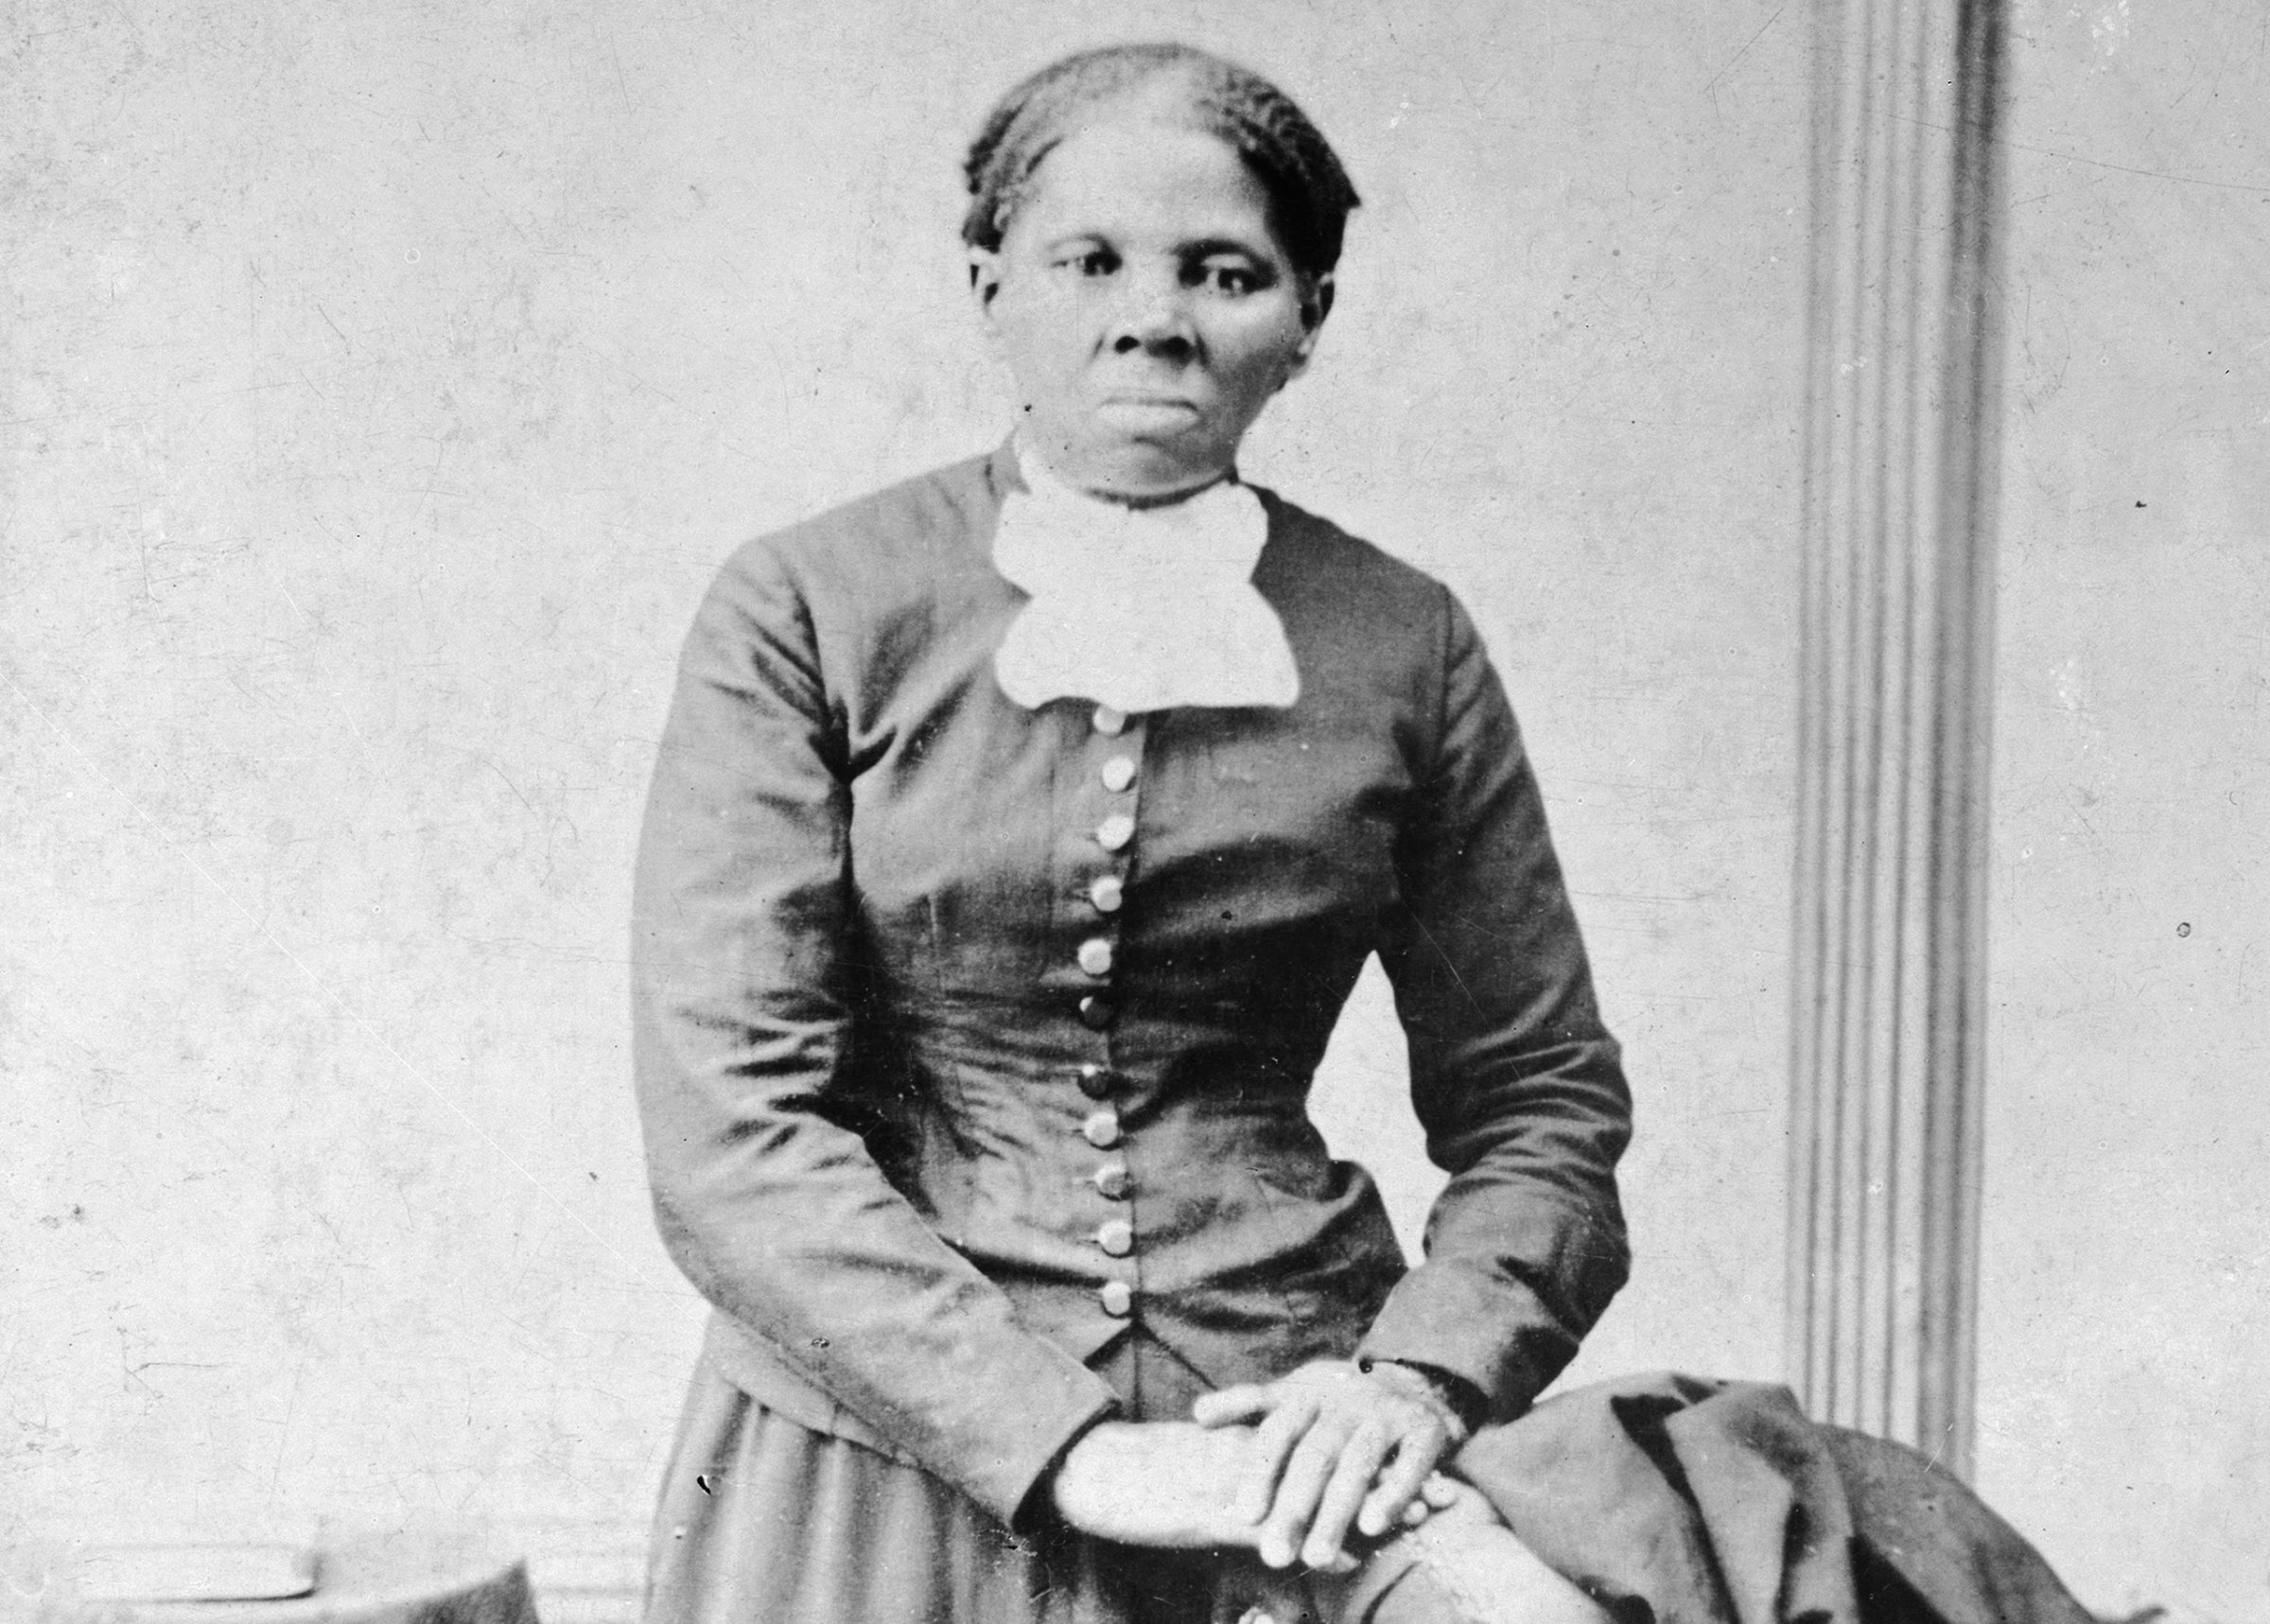 A Treasury official said Wednesday, April 20, 2016, that Secretary Jacob Lew has decided to put Harriet Tubman on the $20 bill, making her the first woman on U.S. paper currency in 100 years.